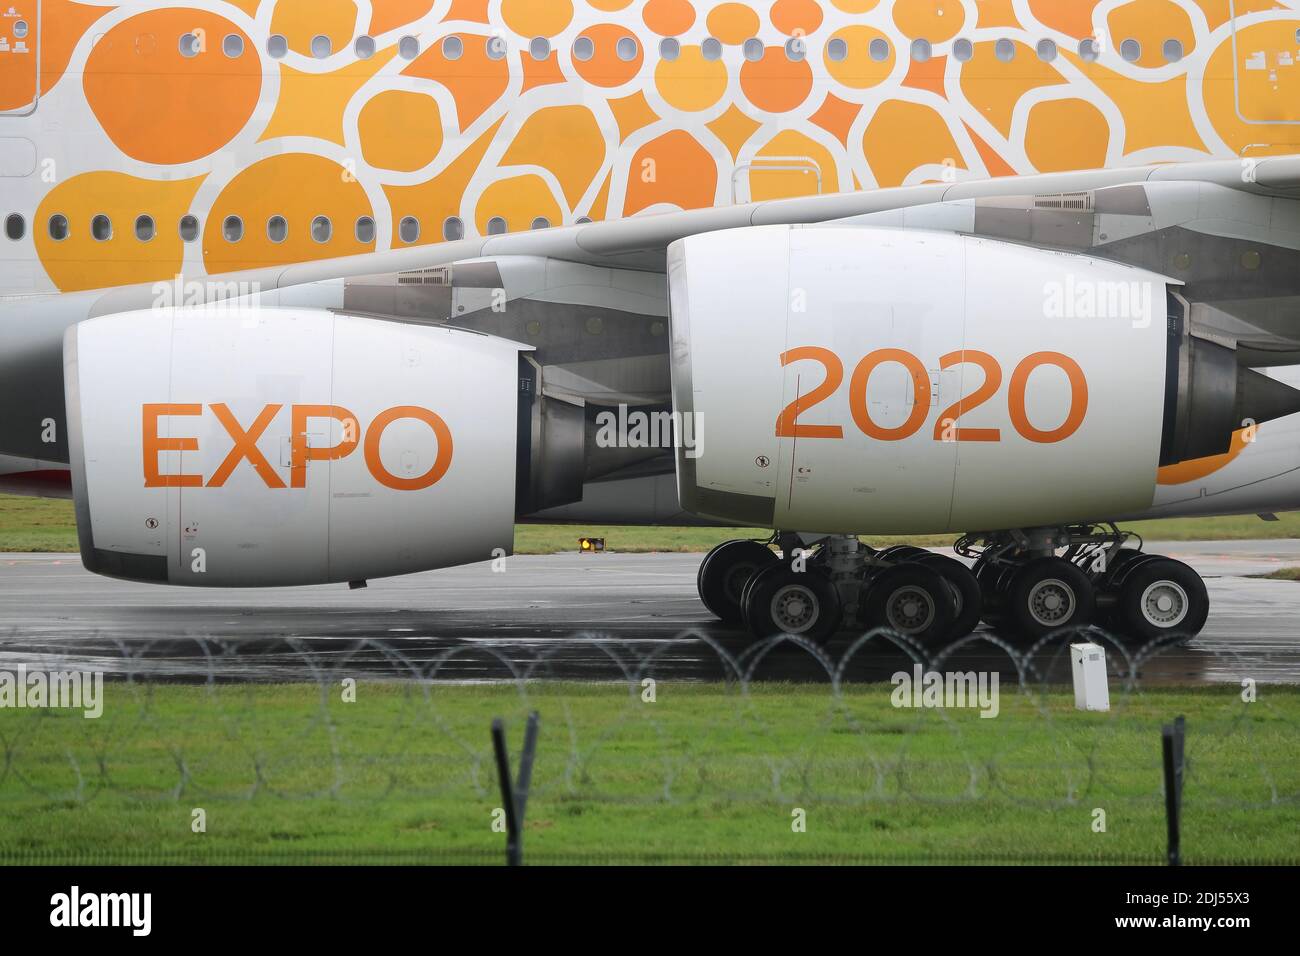 Emirates Airbus A380 Orange Expo 2020 Livery at Manchester Airport from Dubai. Stock Photo